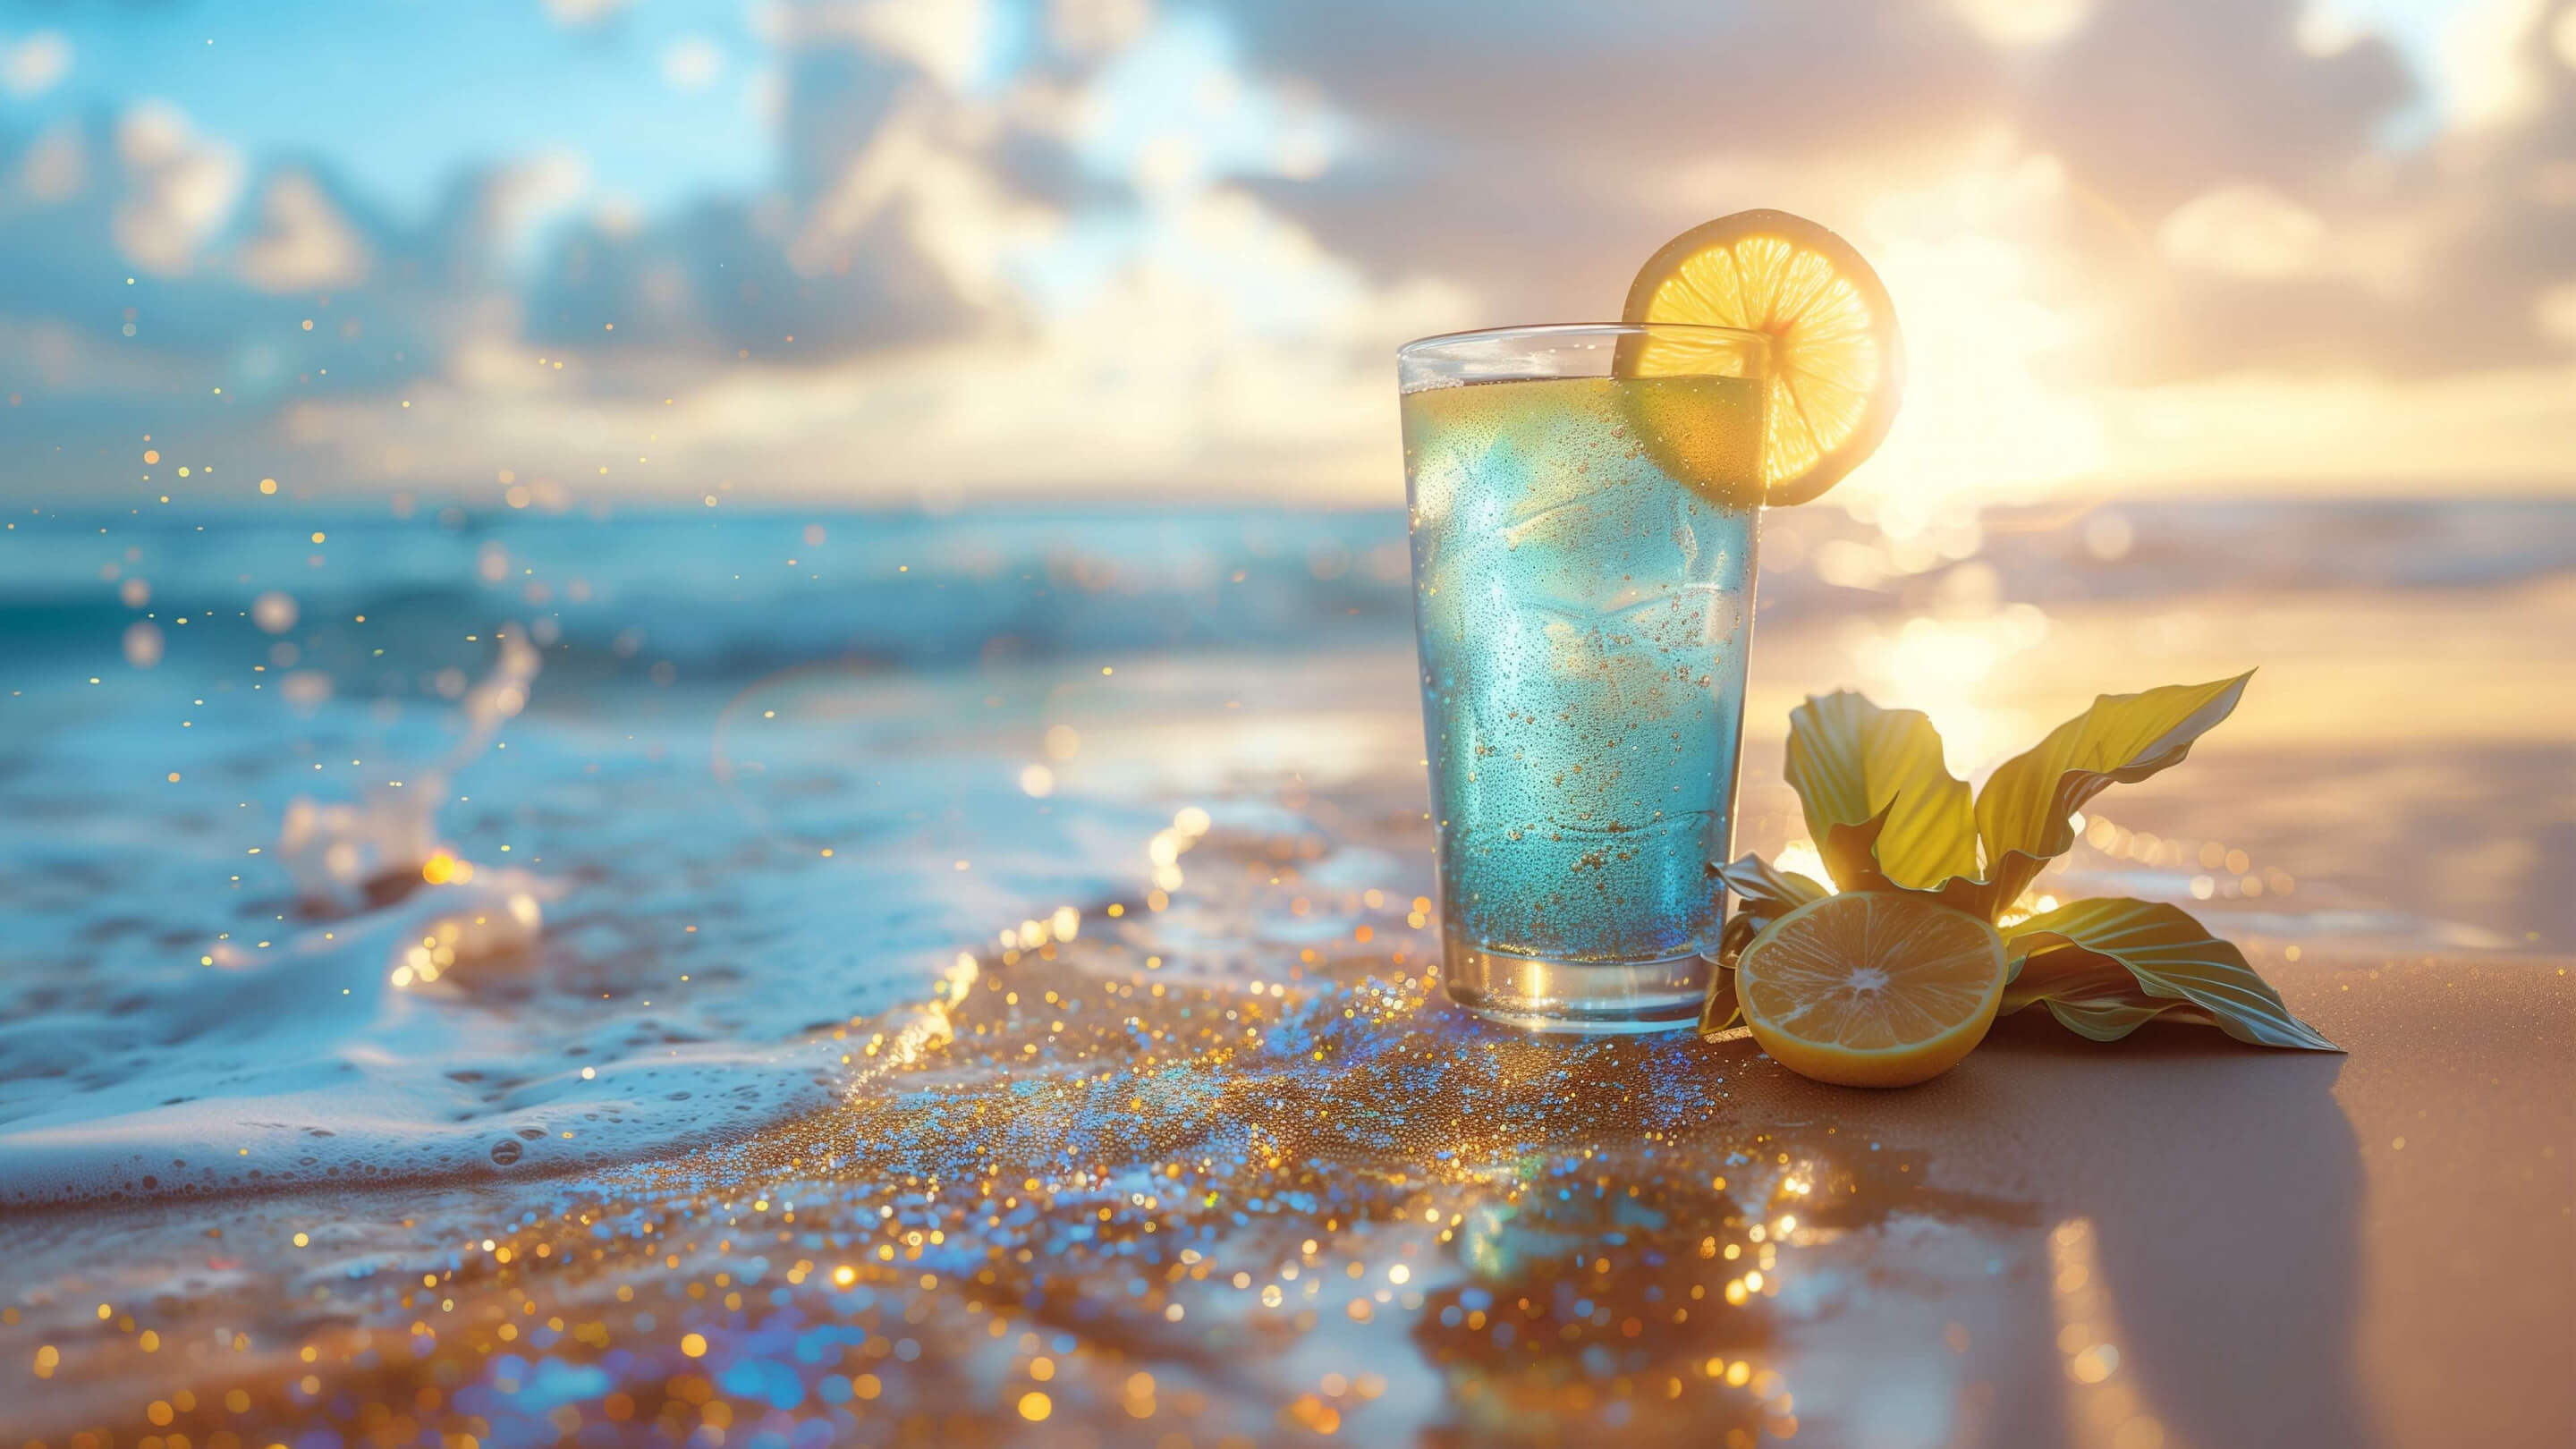 Cold drink on the ocean shore wallpaper 2880x1620